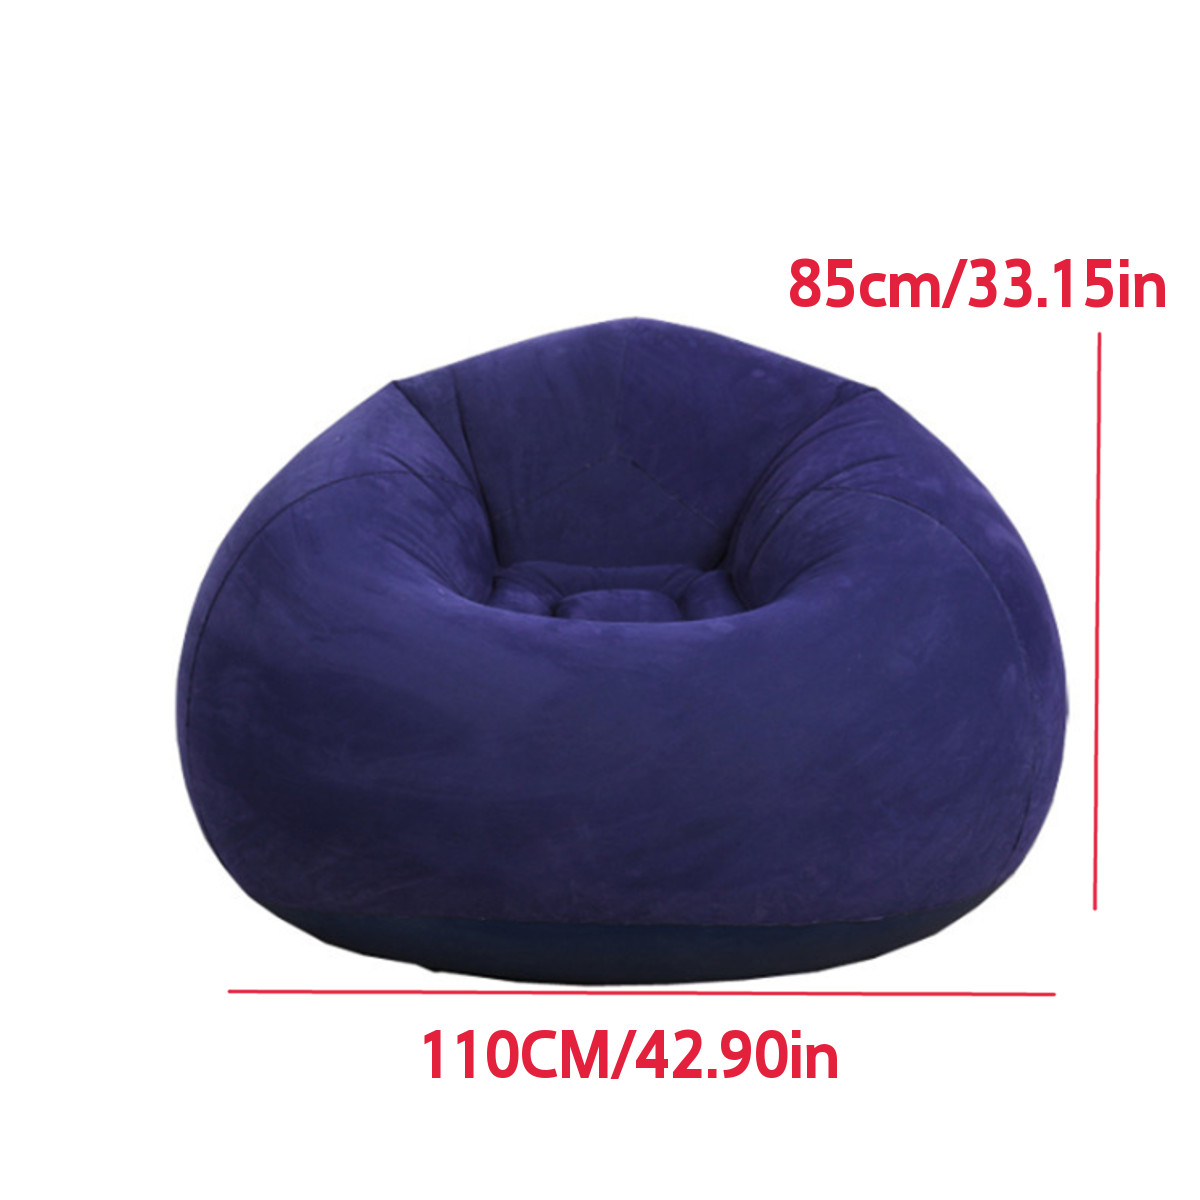 110x85cm-Large-Inflatable-Chair-Bean-Bag-PVC-IndoorOutdoor-Garden-Furniture-Lounge-Adult-Lazy-Sofa-N-1682288-11